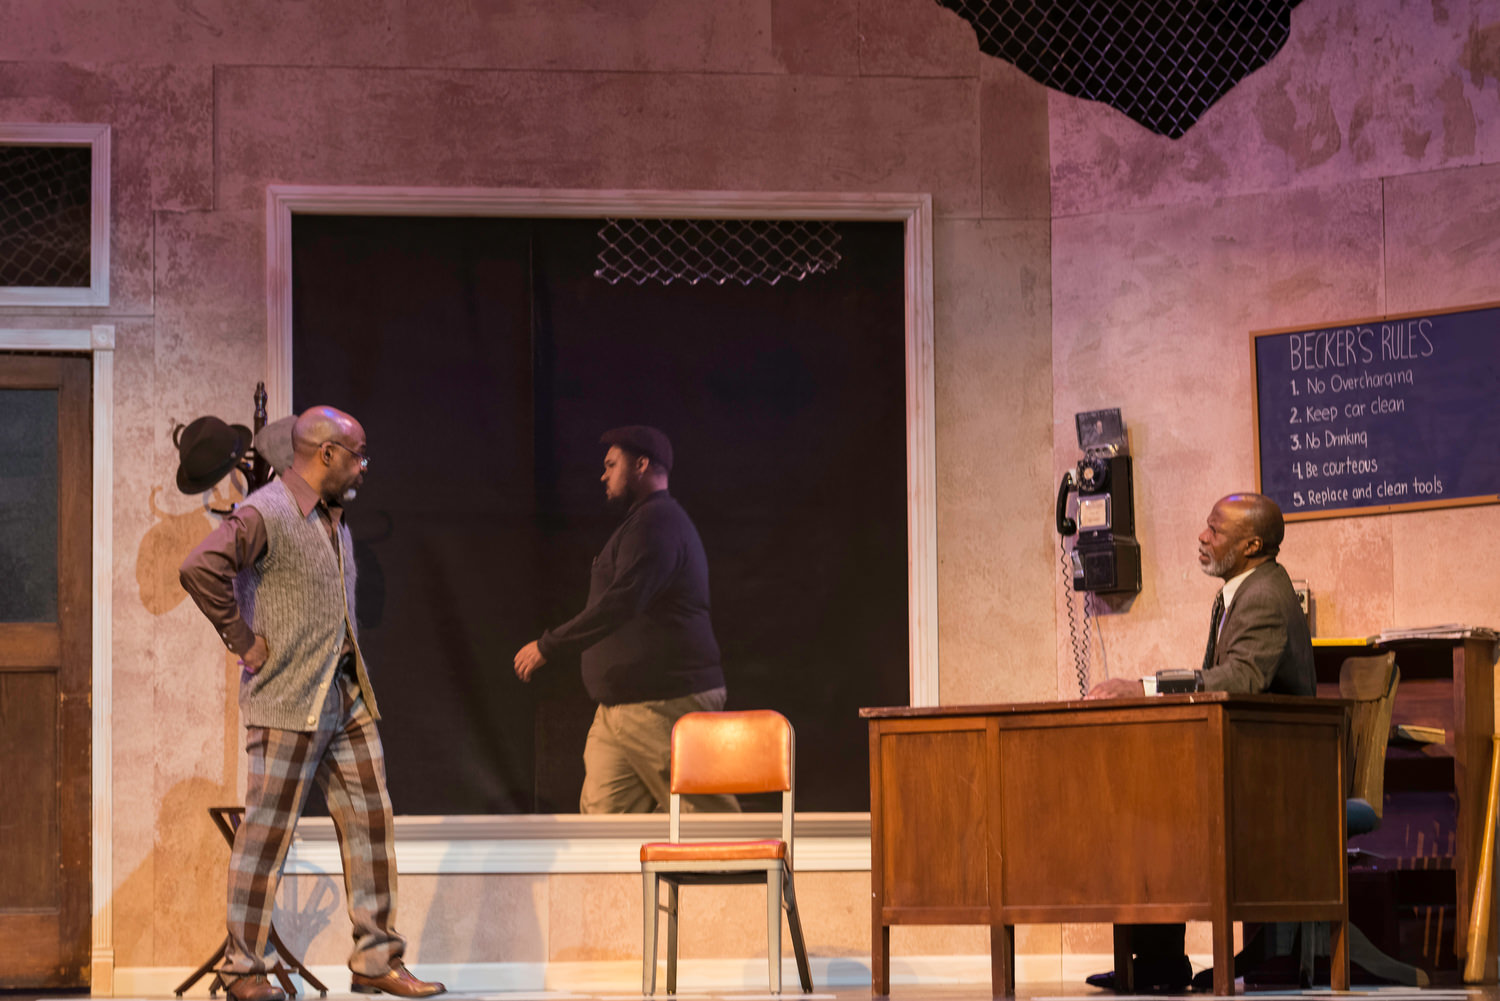 ShawnJ West (Turnbo), L. Peter Callender (Becker), and Edward Neville Ewell (Youngblood) in African-American Shakespeare Company’s production of ‘Jitney’, directed by L. Peter Callender; photo credit: Lance Huntley 4